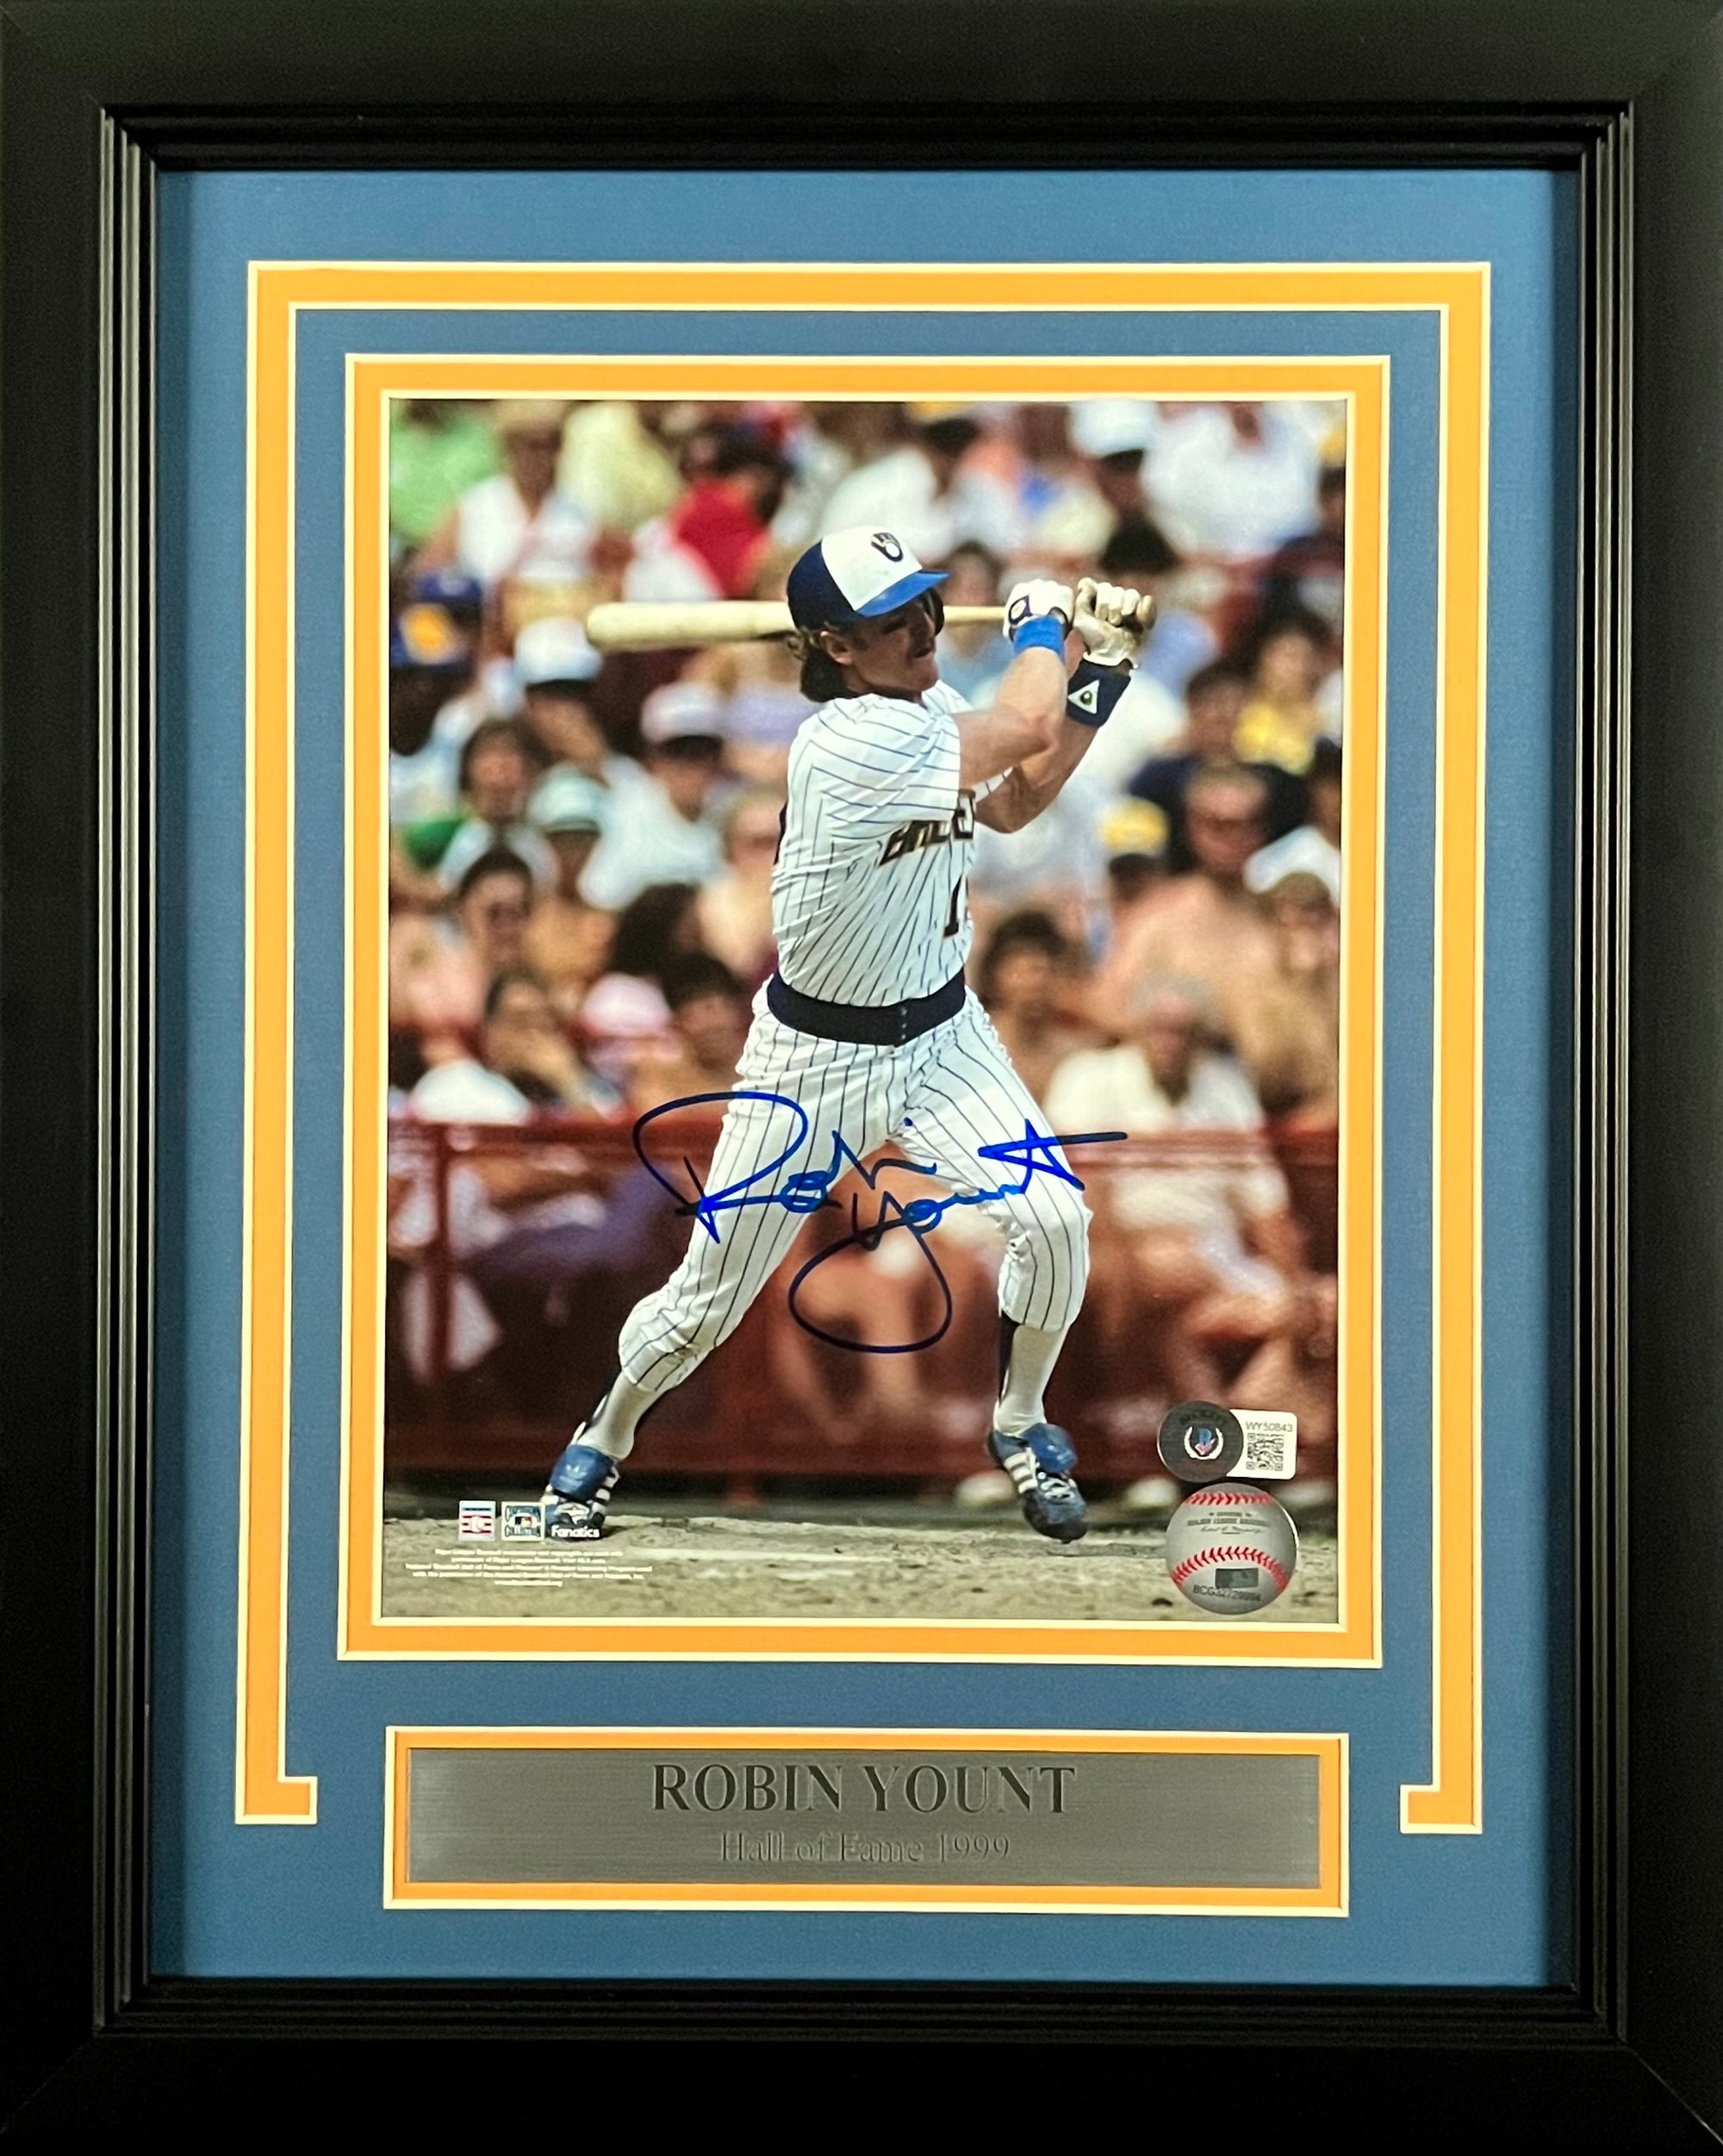 Robin Yount Milwaukee Brewers Autographed 8x10 Photo Framed